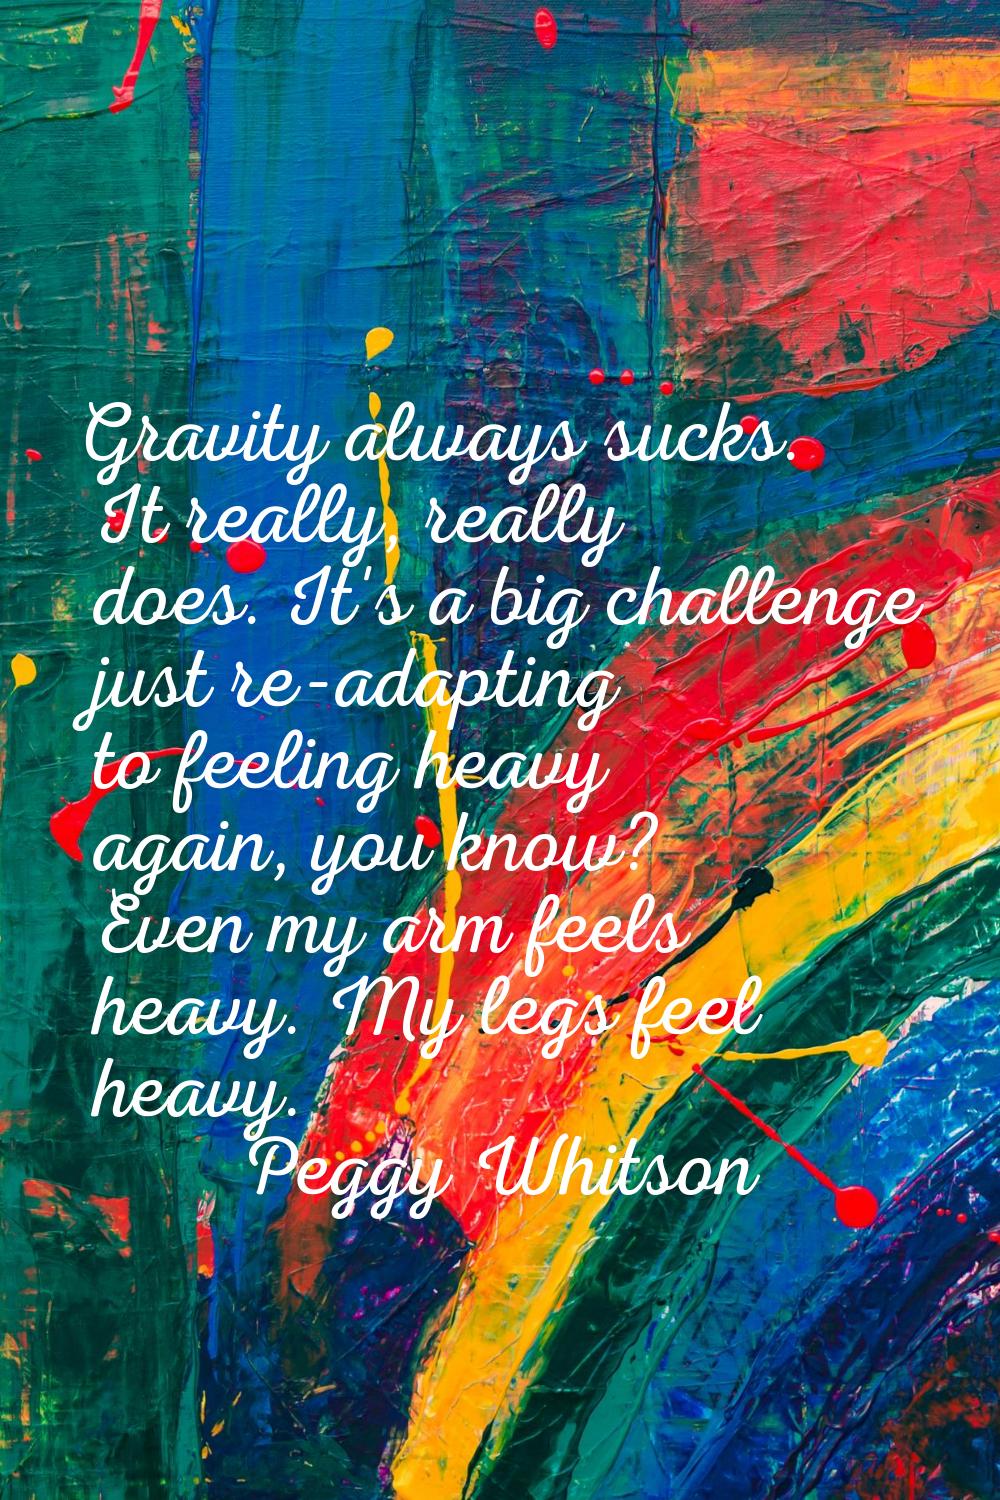 Gravity always sucks. It really, really does. It's a big challenge just re-adapting to feeling heav